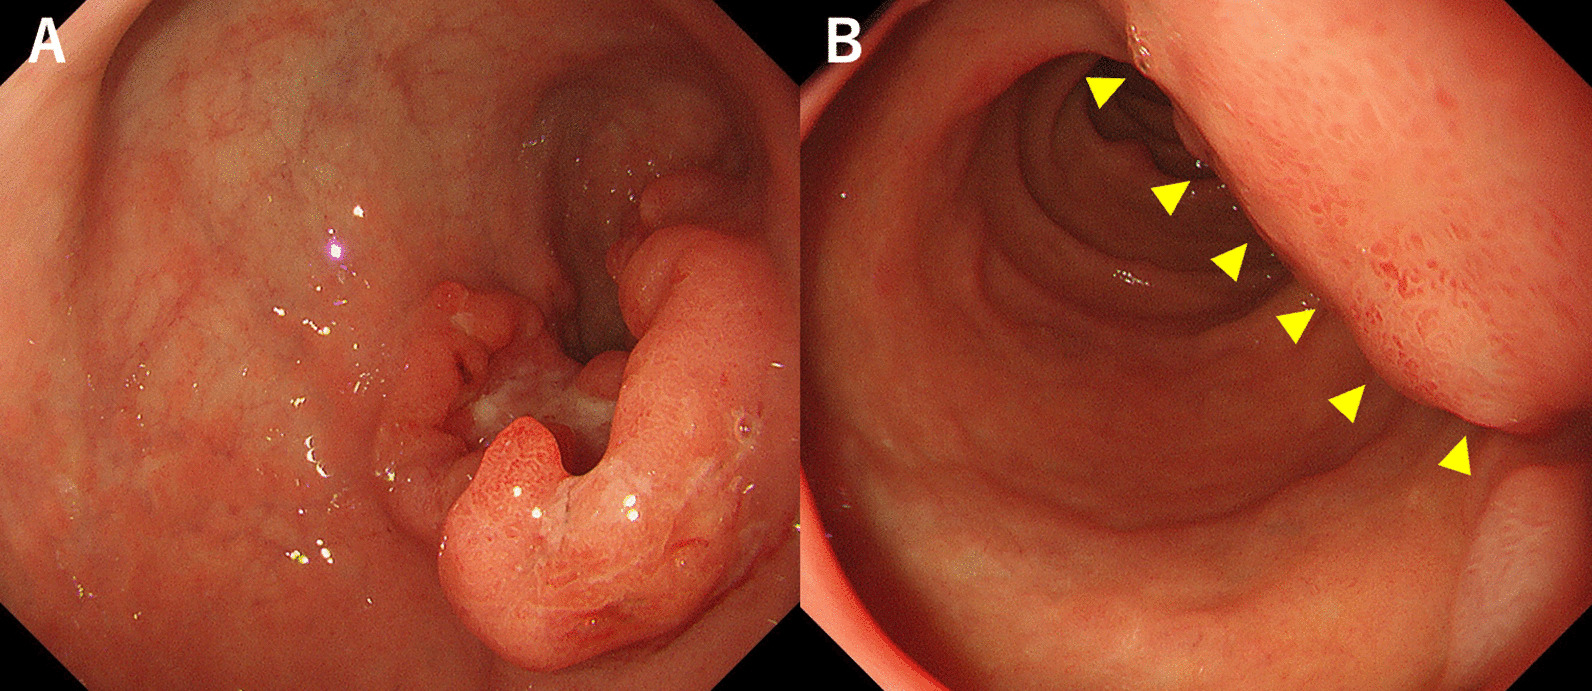 Minimally invasive elective gastrectomy after preoperative chemotherapy in a patient with frailty who presented with locally far advanced-stage gastric cancer: a case report